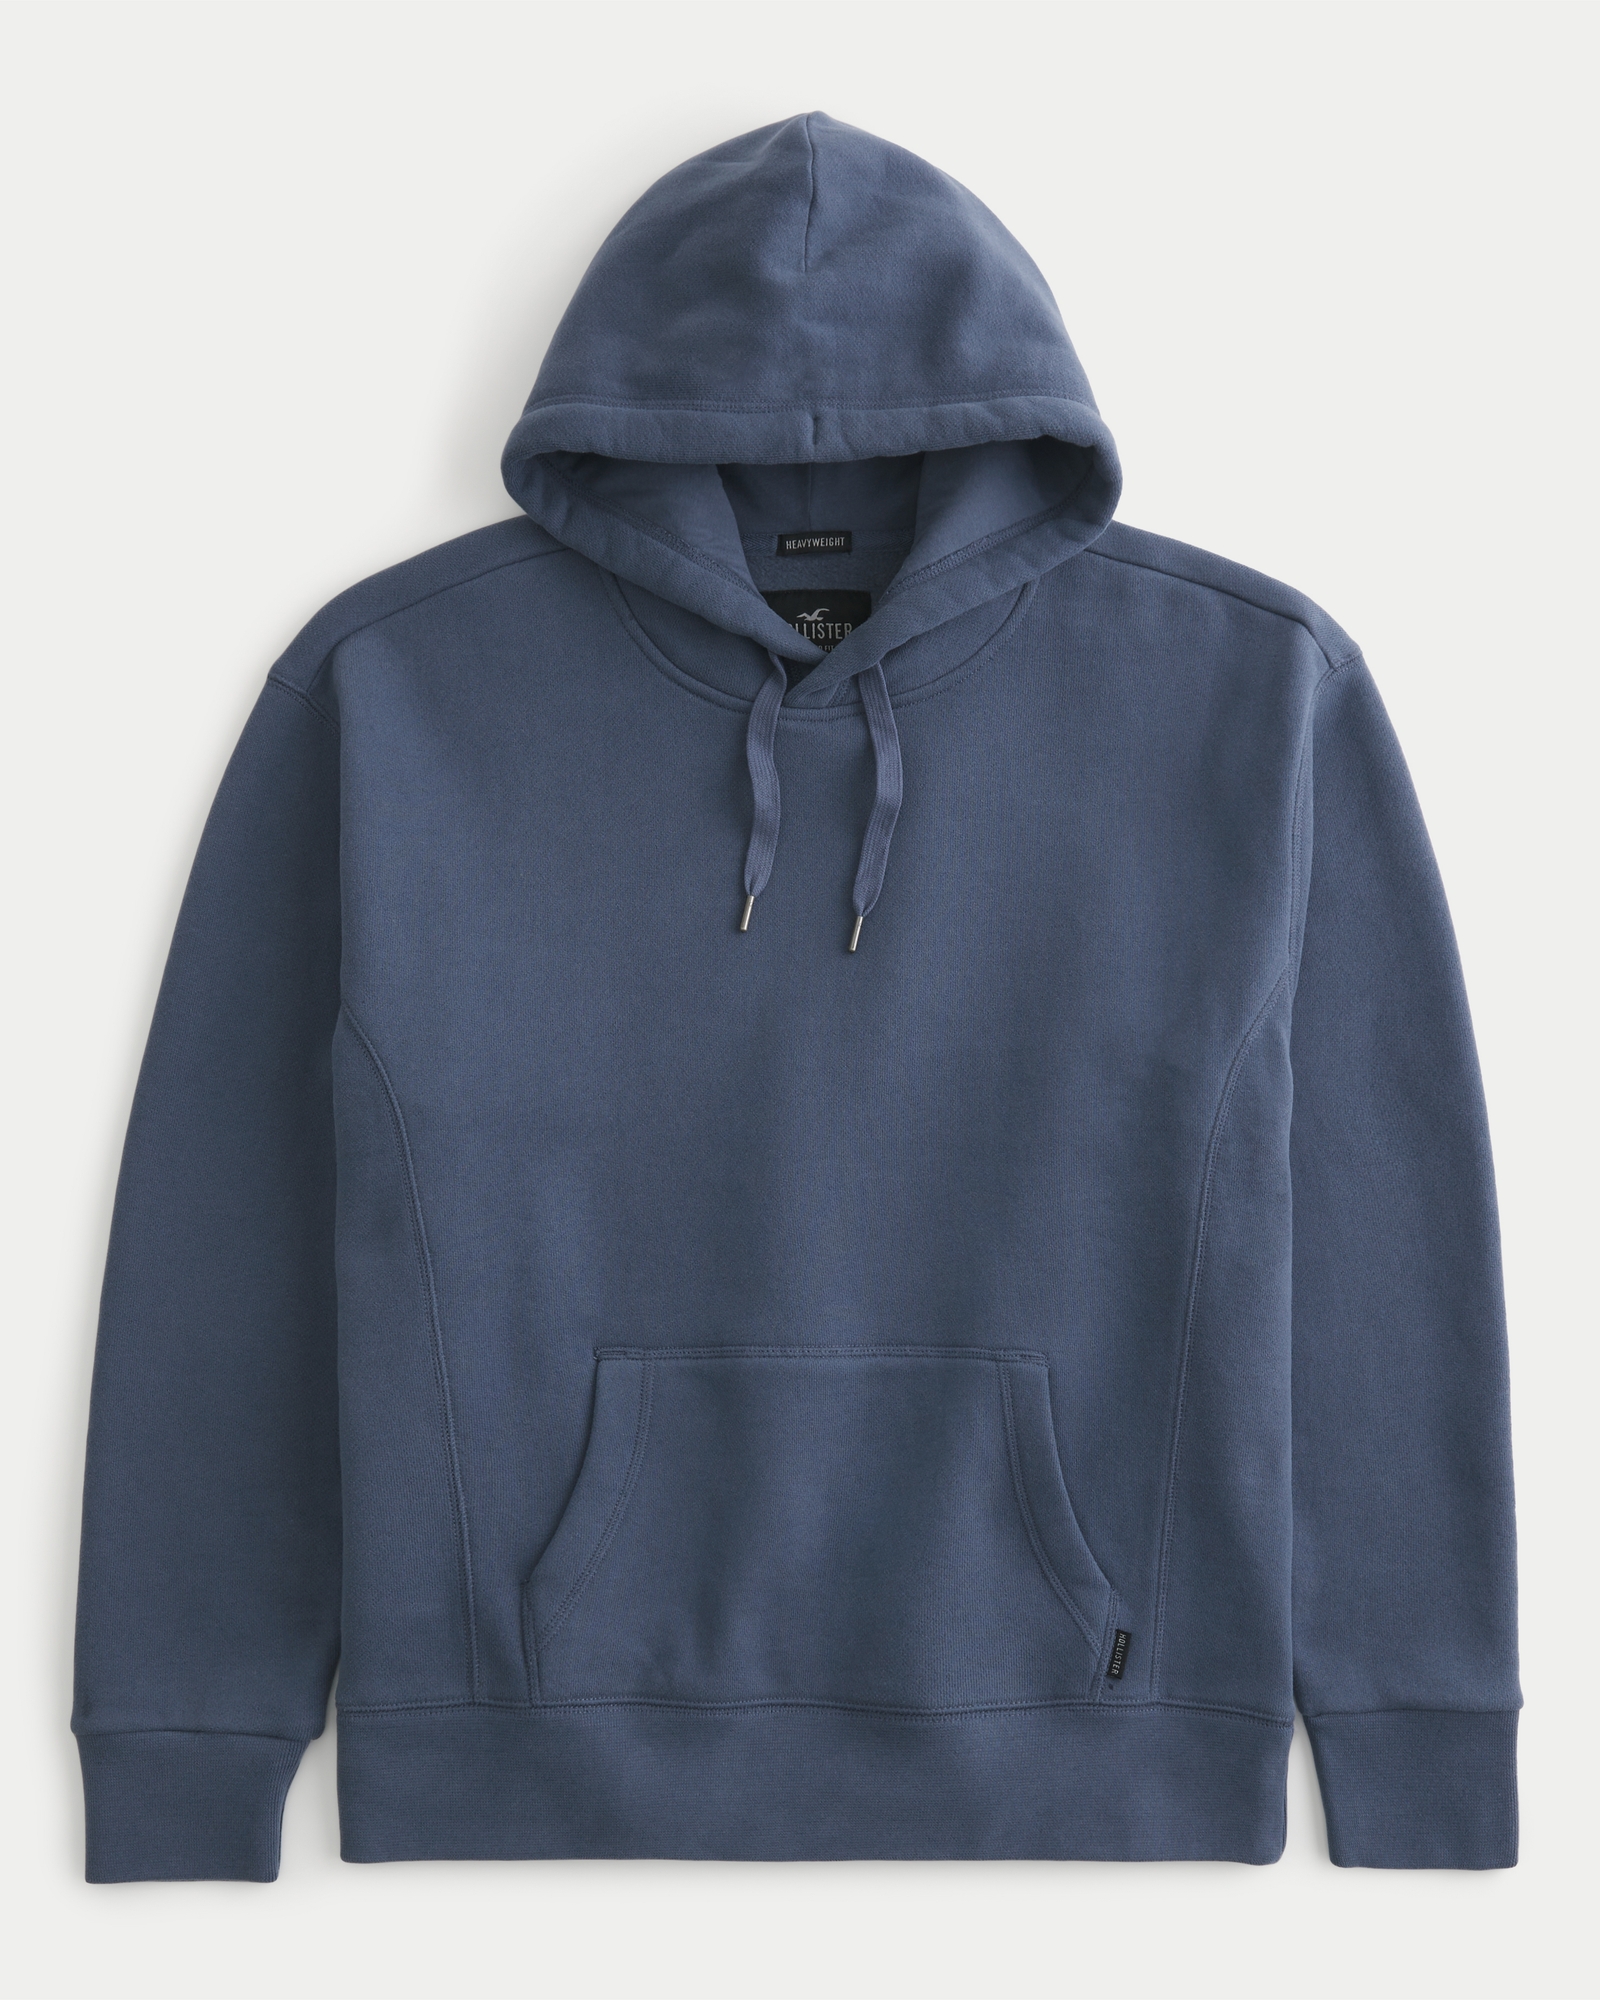 Hollister Hoodie in White for Men